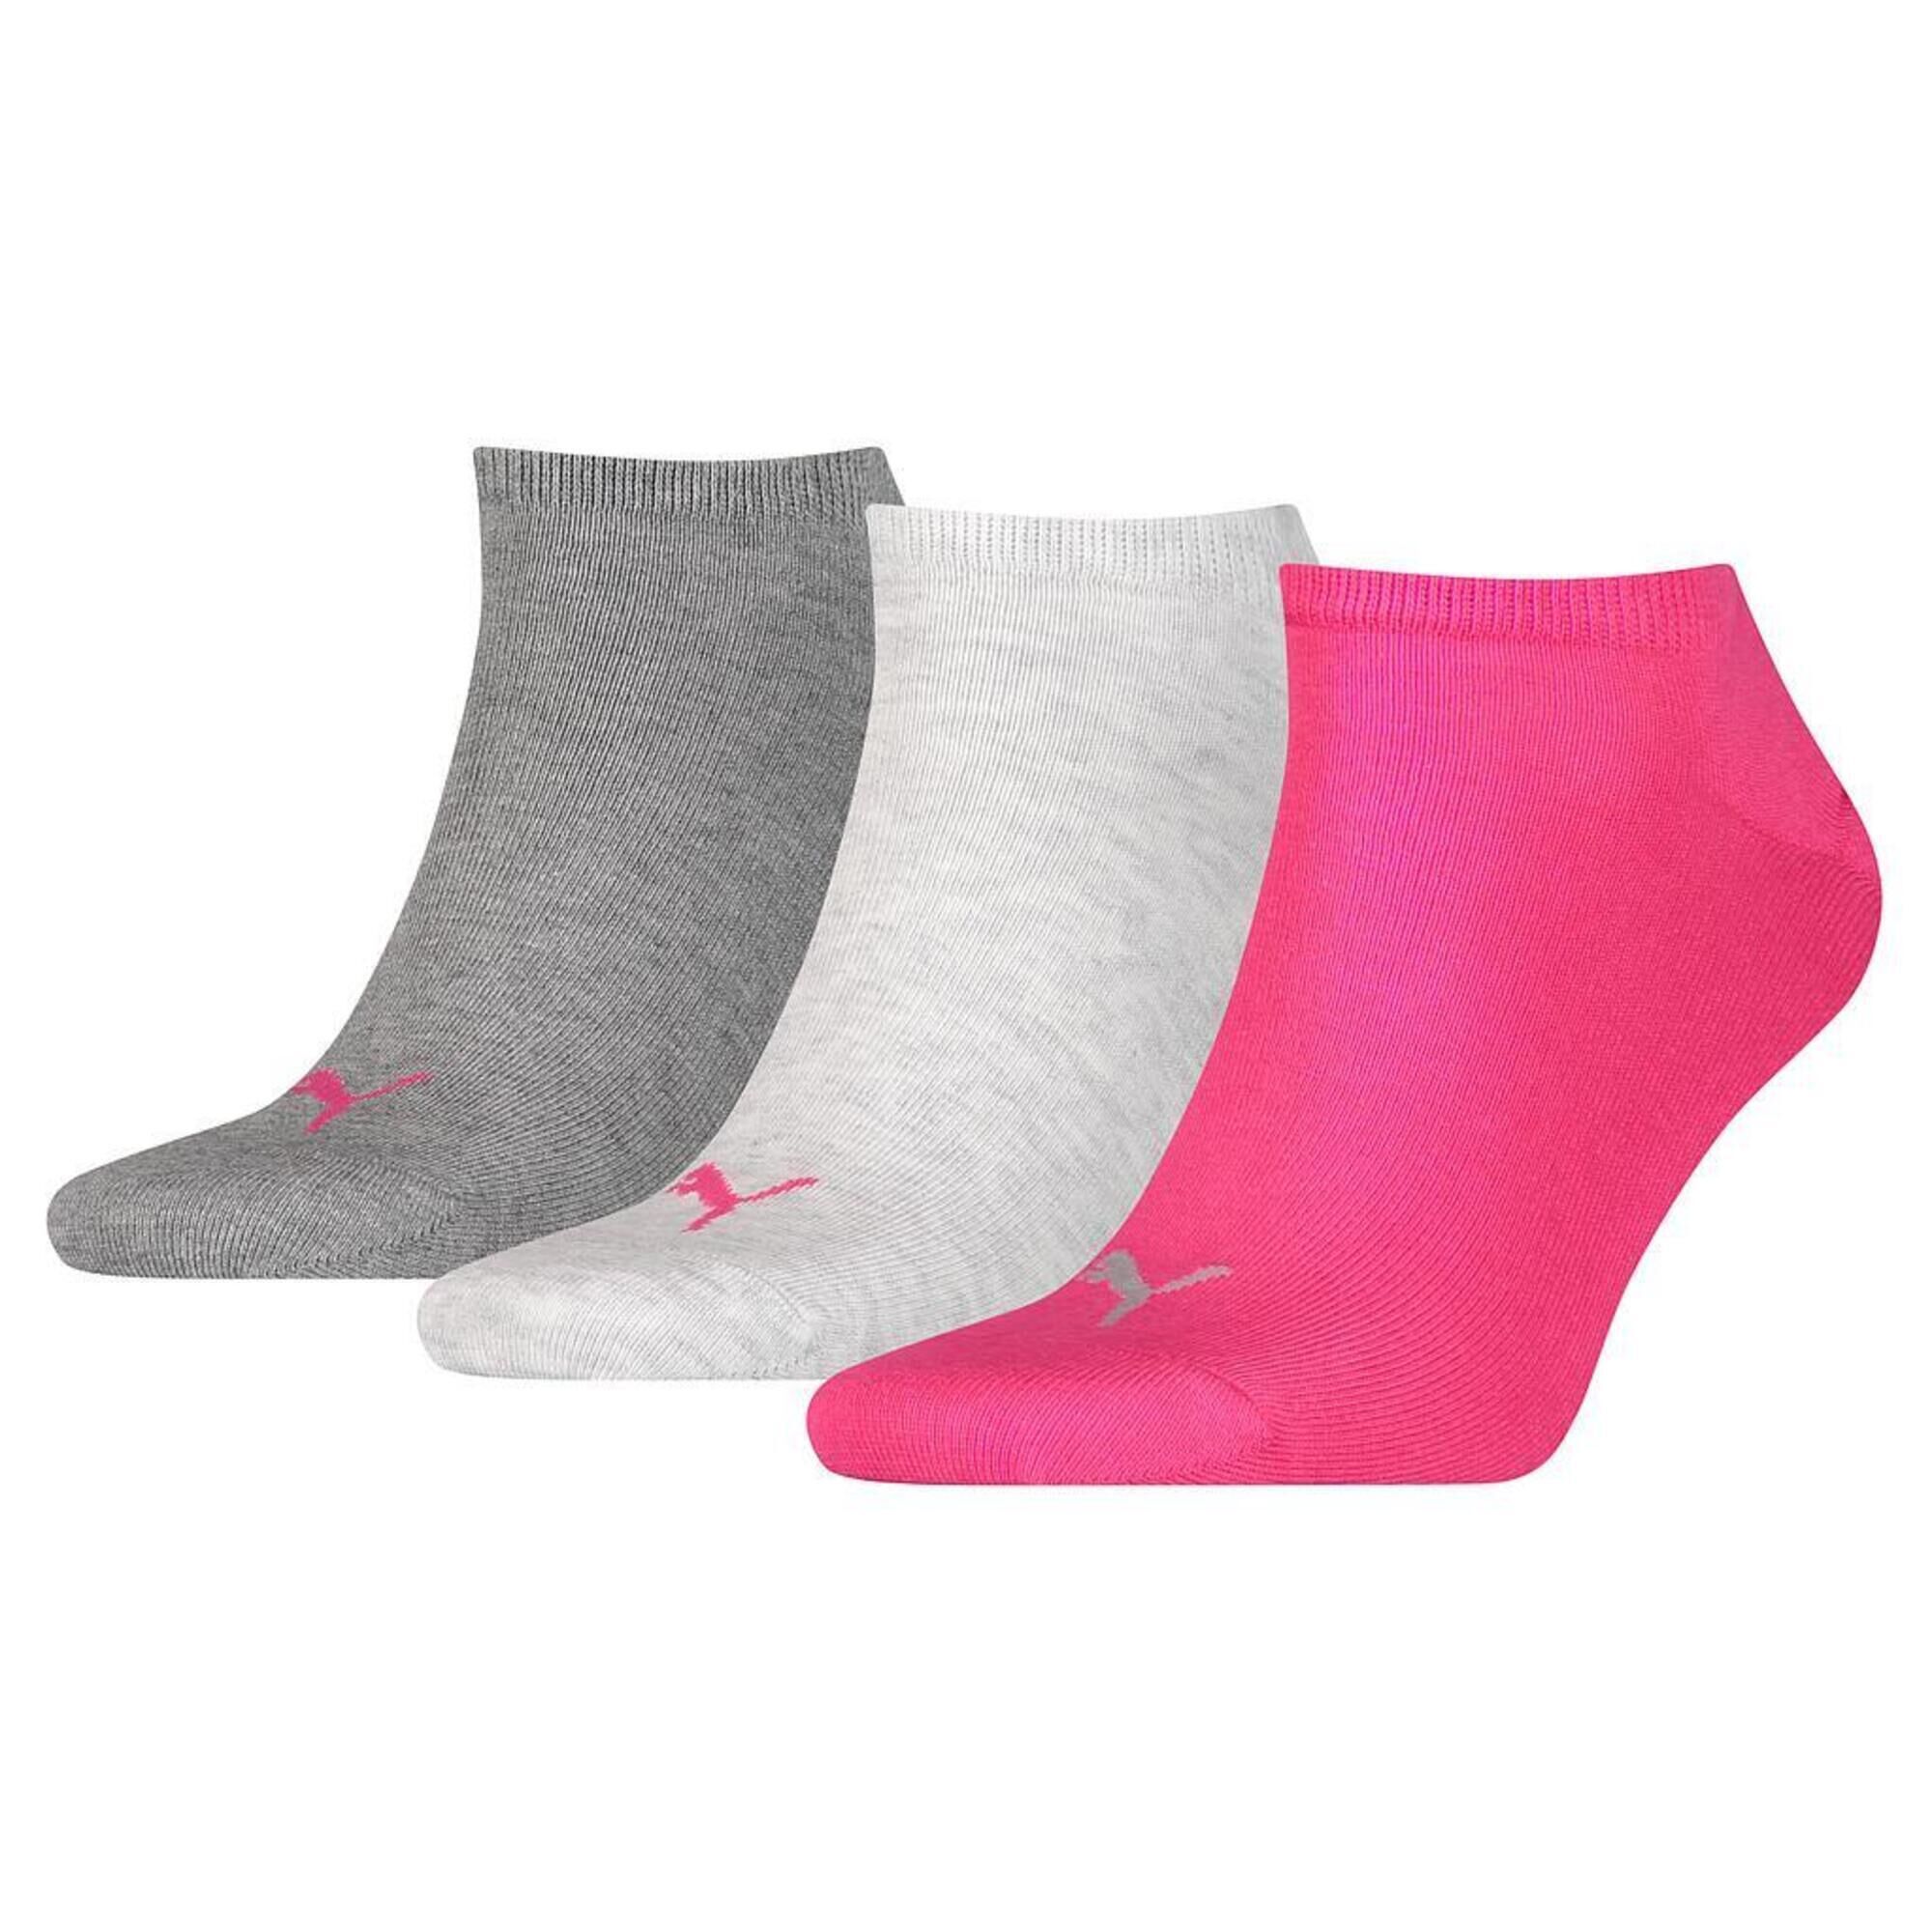 PUMA Unisex Adult Invisible Socks (Pack of 3) (Pink/Grey/Charcoal Grey)